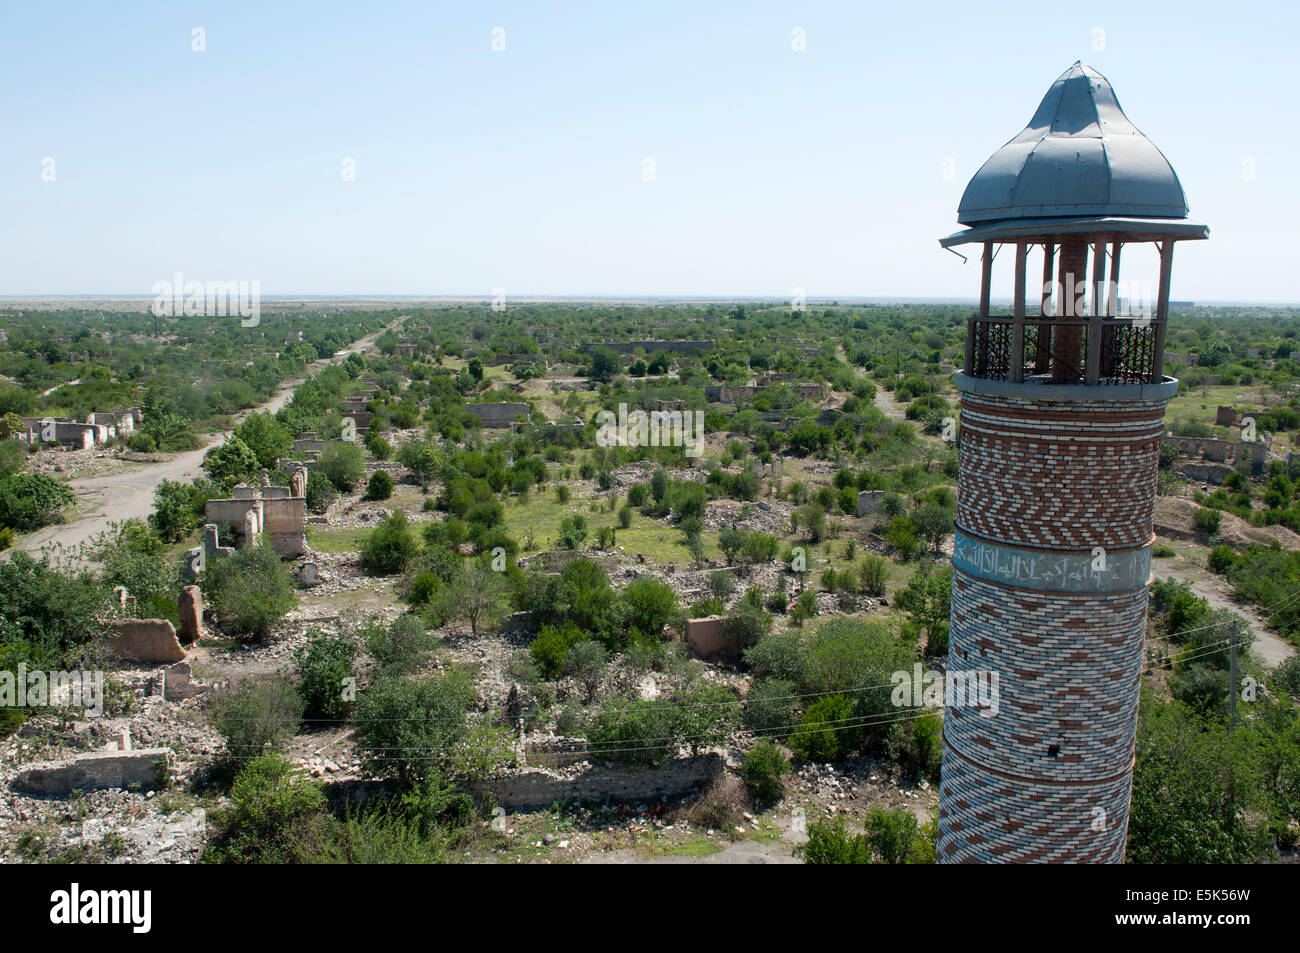 Minaret of abandoned ancient Persian Mosque, Agdam ghost town, unrecognized state of Nagorno-Karabakh Stock Photo